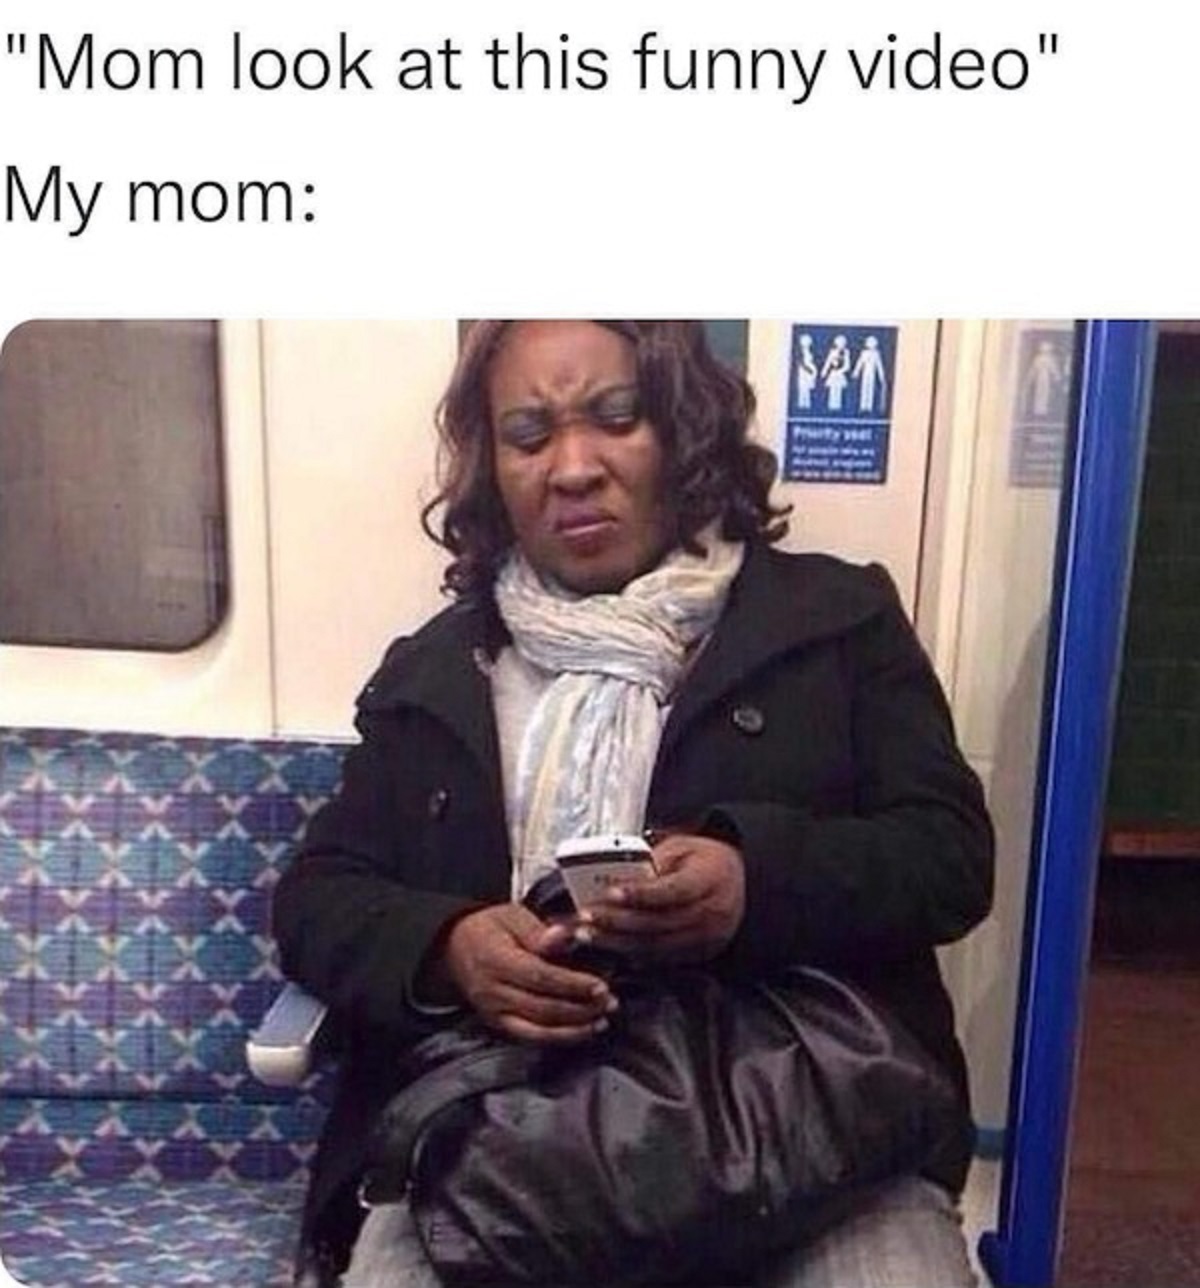 photo caption - "Mom look at this funny video" My mom 141